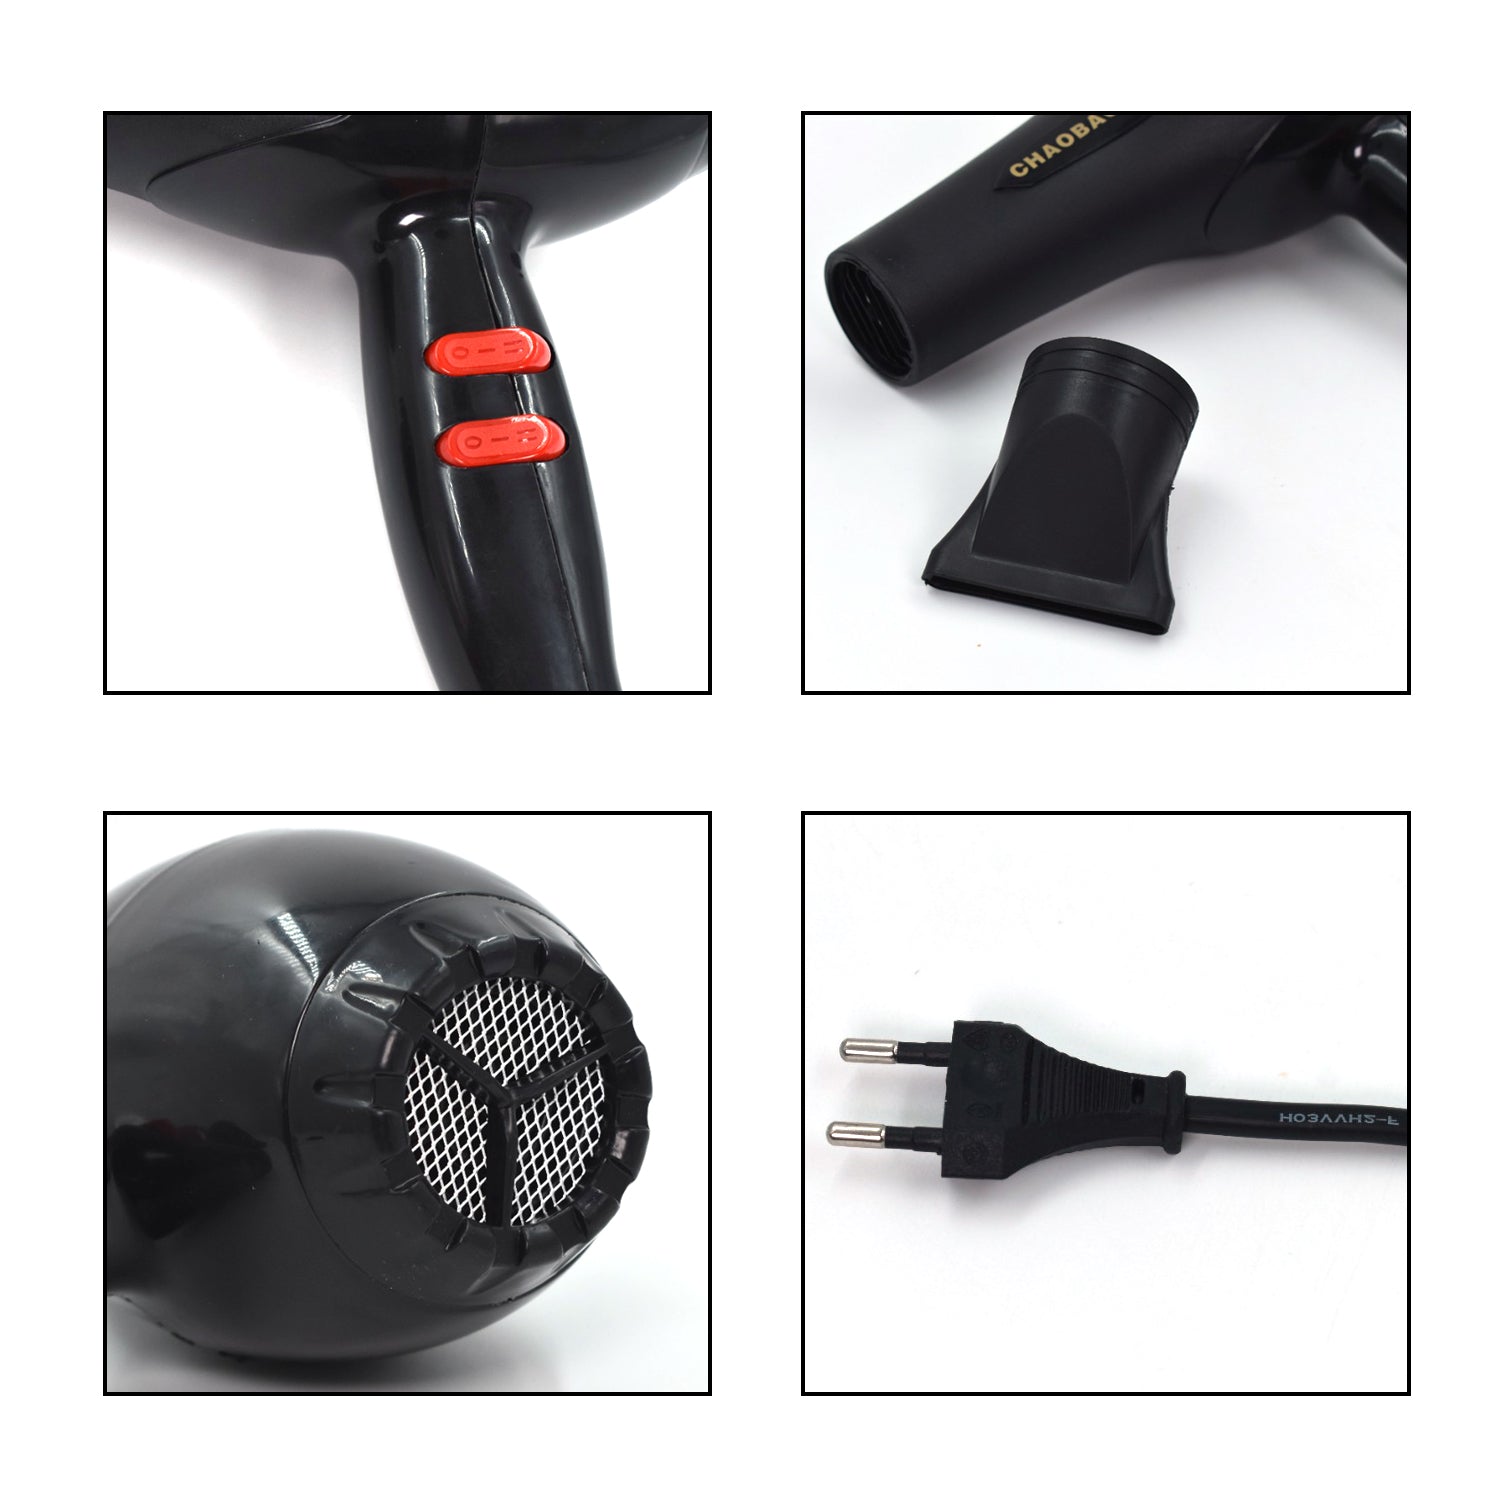 1337A Professional Stylish Hair Dryers For Women And Men 